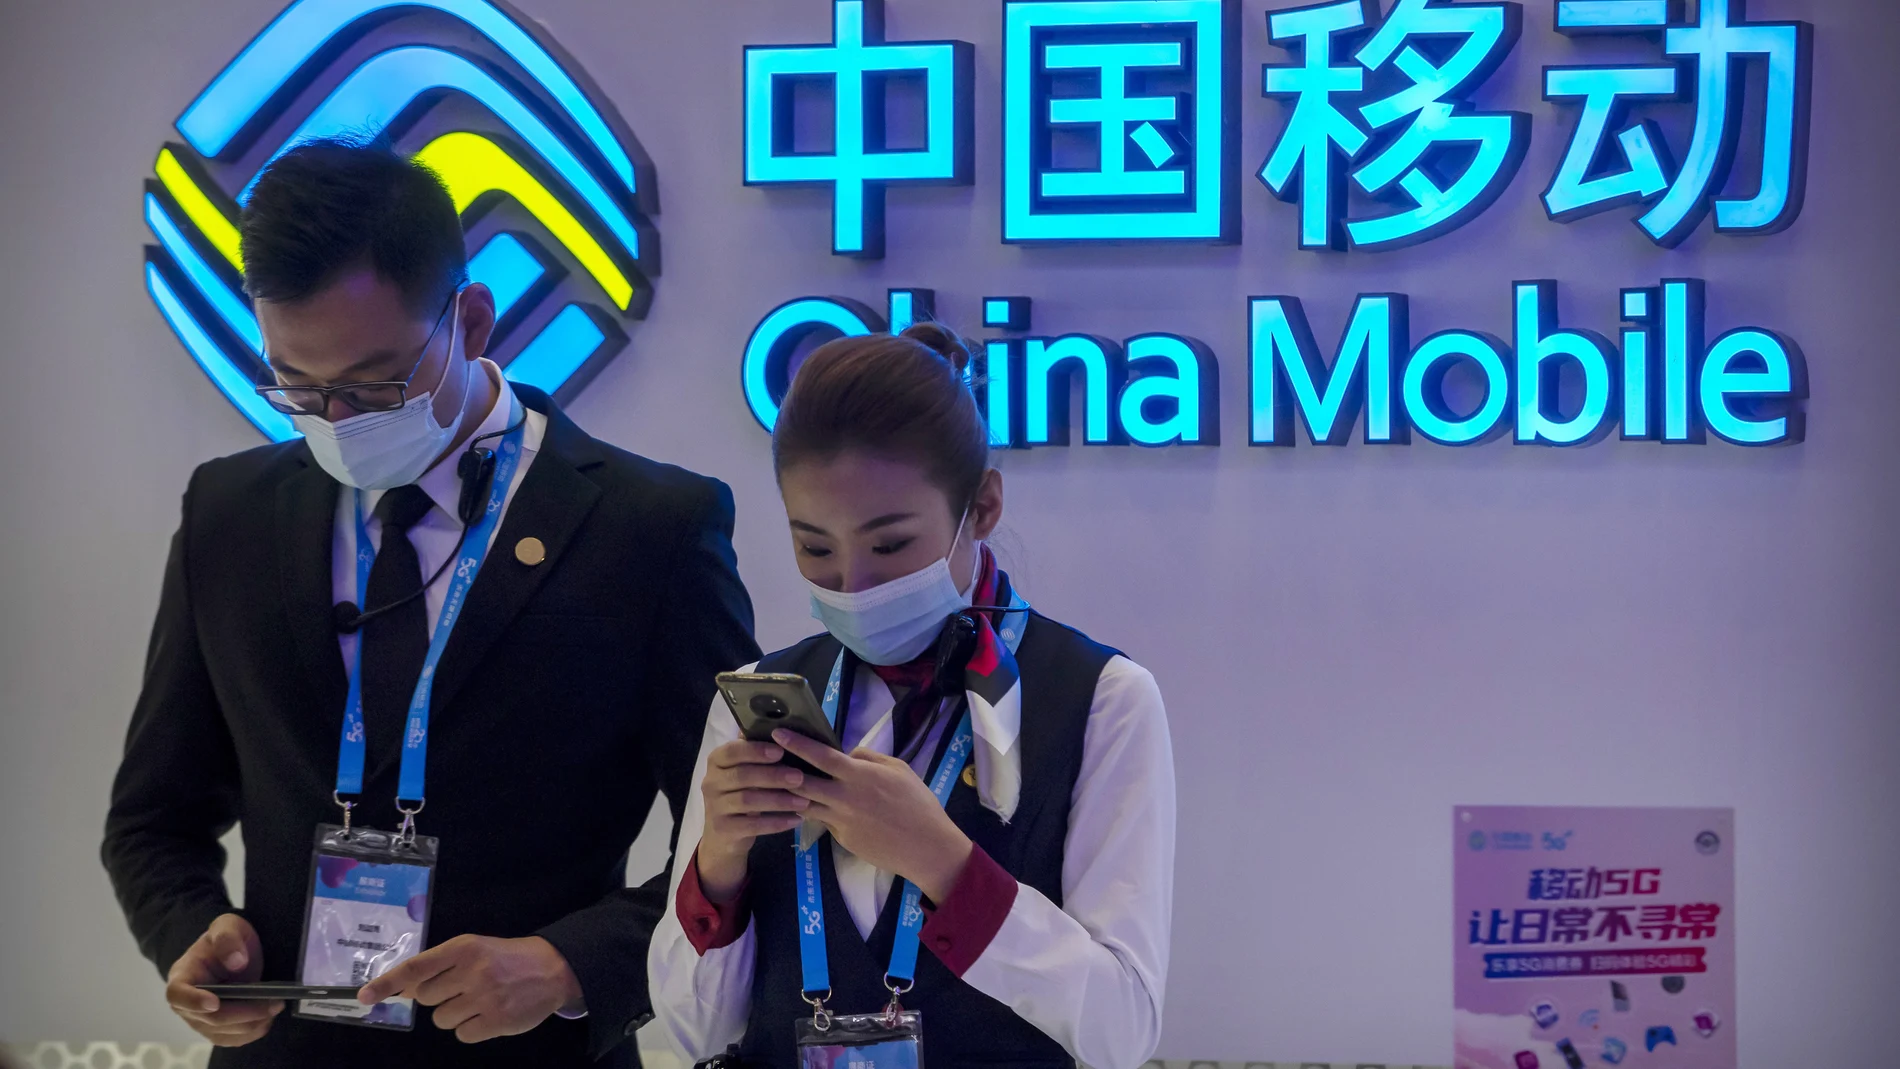 FILE - In this Oct. 14, 2020 file photo, staff members wearing face masks to protect against the spread of the coronavirus use their smartphones at a display from Chinese telecommunications firm China Mobile at the PT Expo in Beijing. The New York Stock Exchange is going ahead with plans to delist shares of three Chinese state-owned phone carriers under an executive order from President Donald Trump. The exchange said trading in the three companies, China Telecom Corp. Ltd., China Mobile Ltd. and China Unicom Hong Kong Ltd., will be suspended after the markets close on Jan. 11, 2021. (AP Photo/Mark Schiefelbein, File)